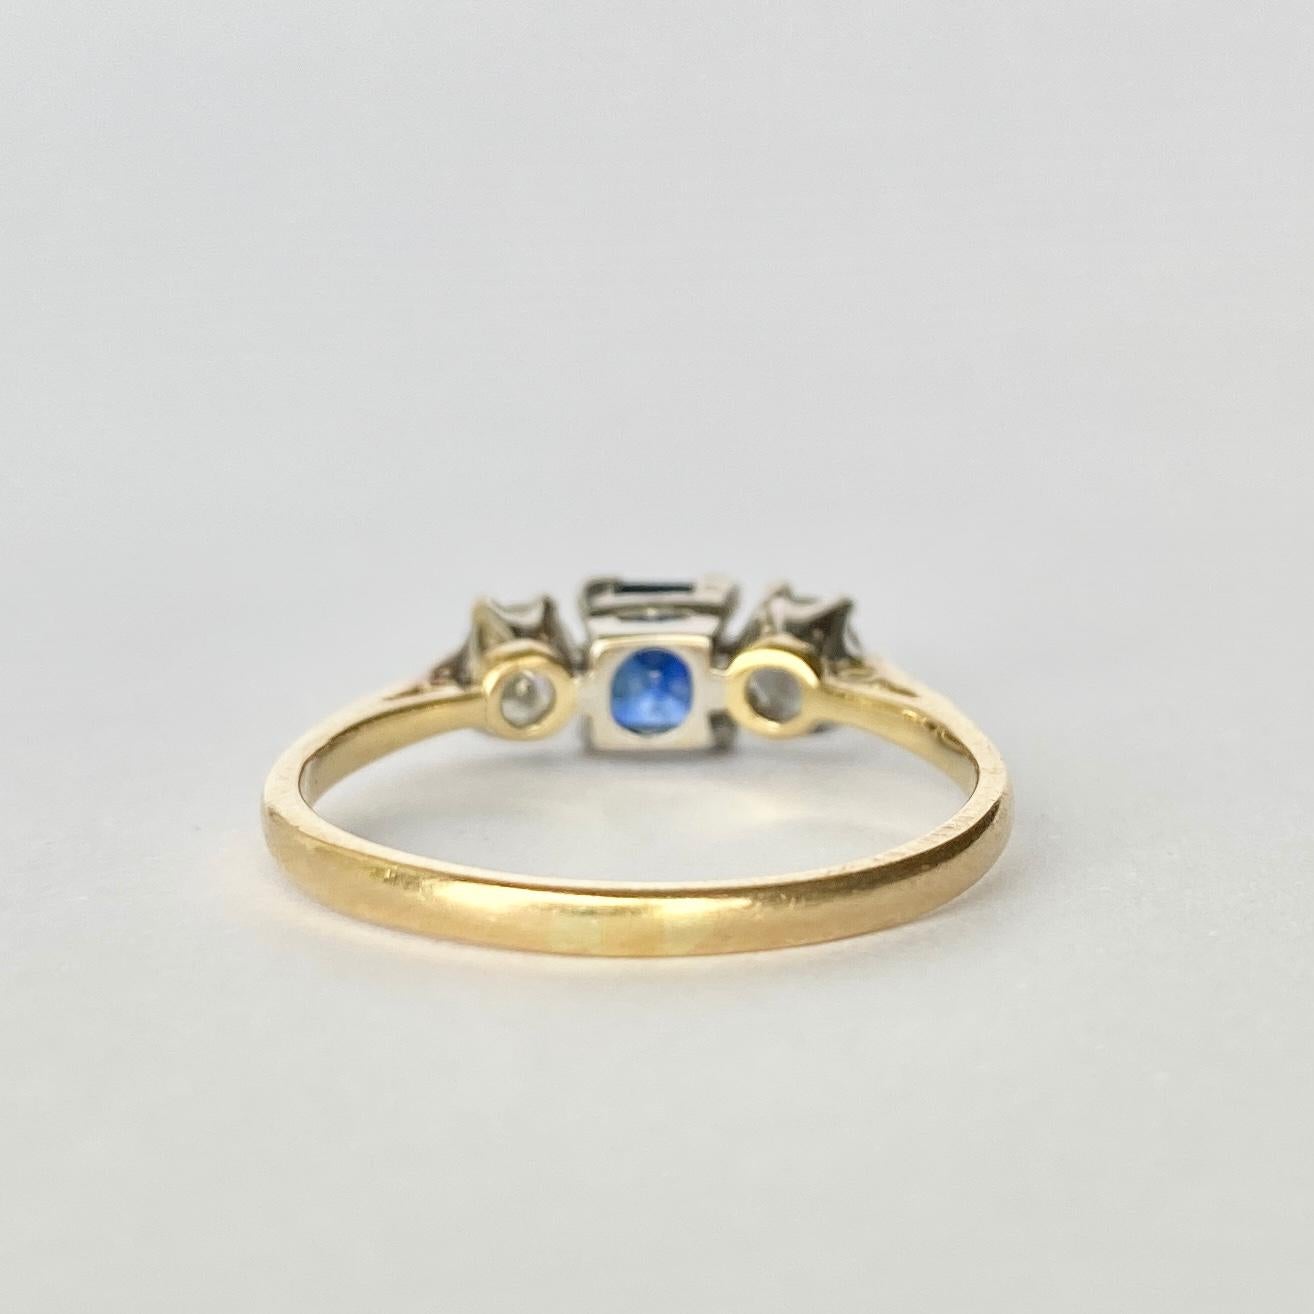 At the centre of this three stone ring there is a gorgeous bright blue sapphire and sat either side is a bright sparkling diamond. The square cut sapphire measures 50pts and the old European cut diamonds measure 20pts each and are set in